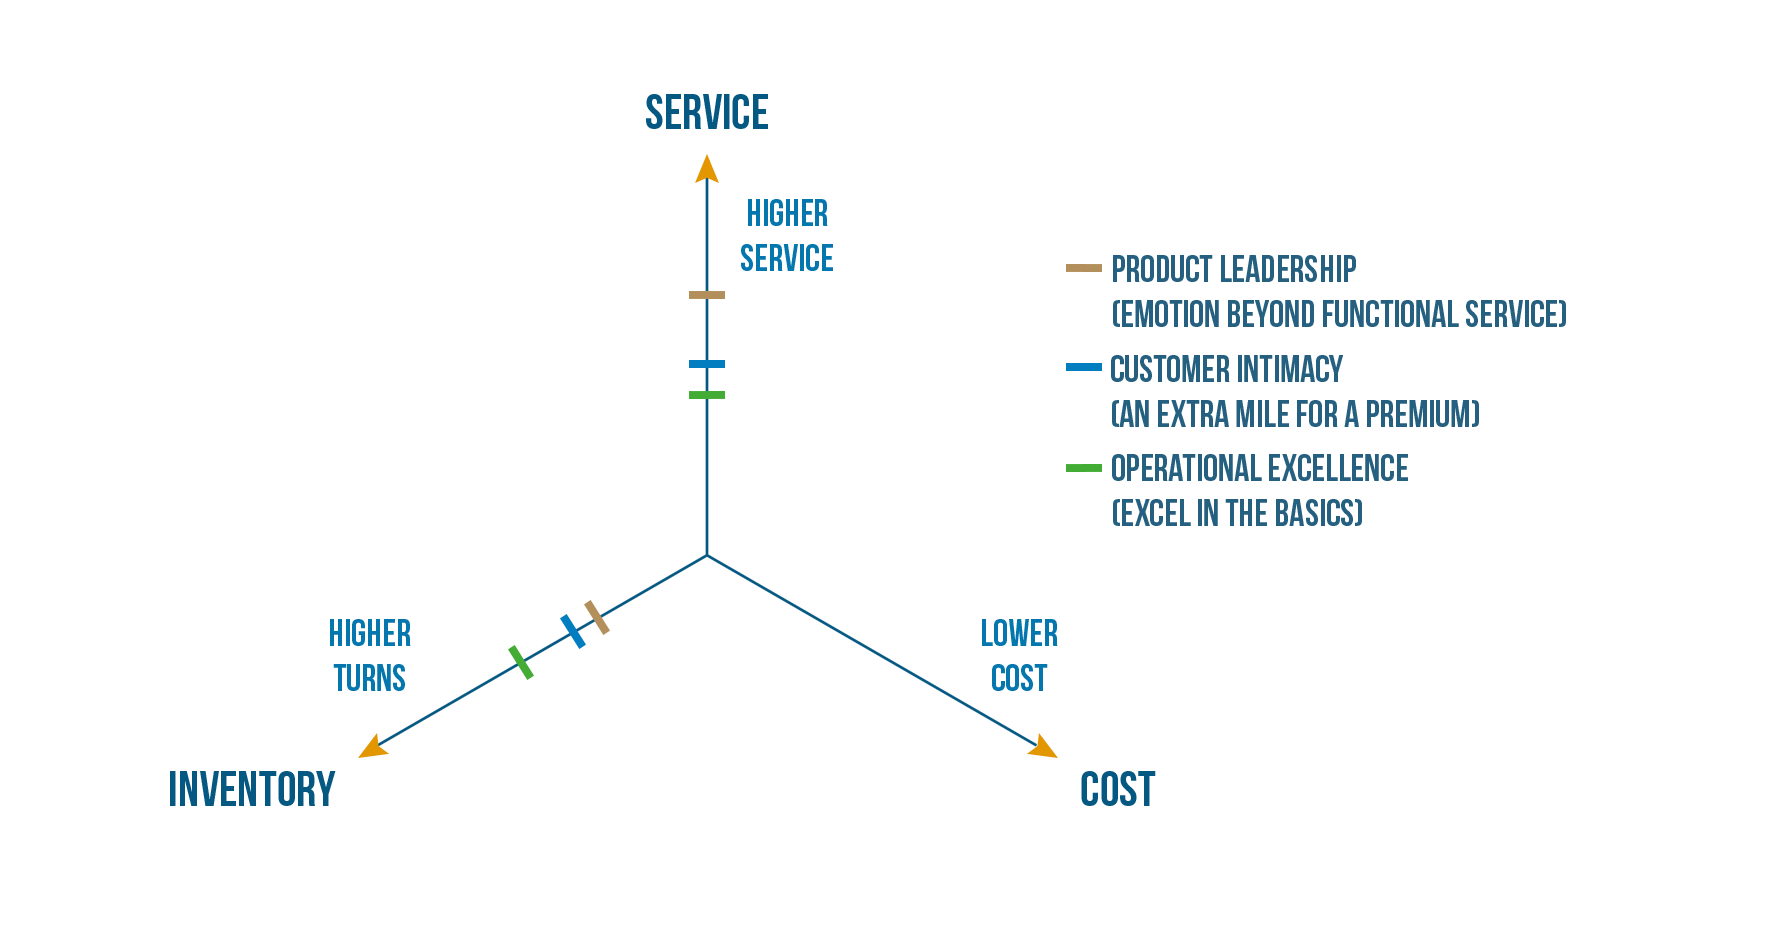 Figure 2 - Mapping Treacy & Wiersema to the Service Axis of the Supply Chain Triangle